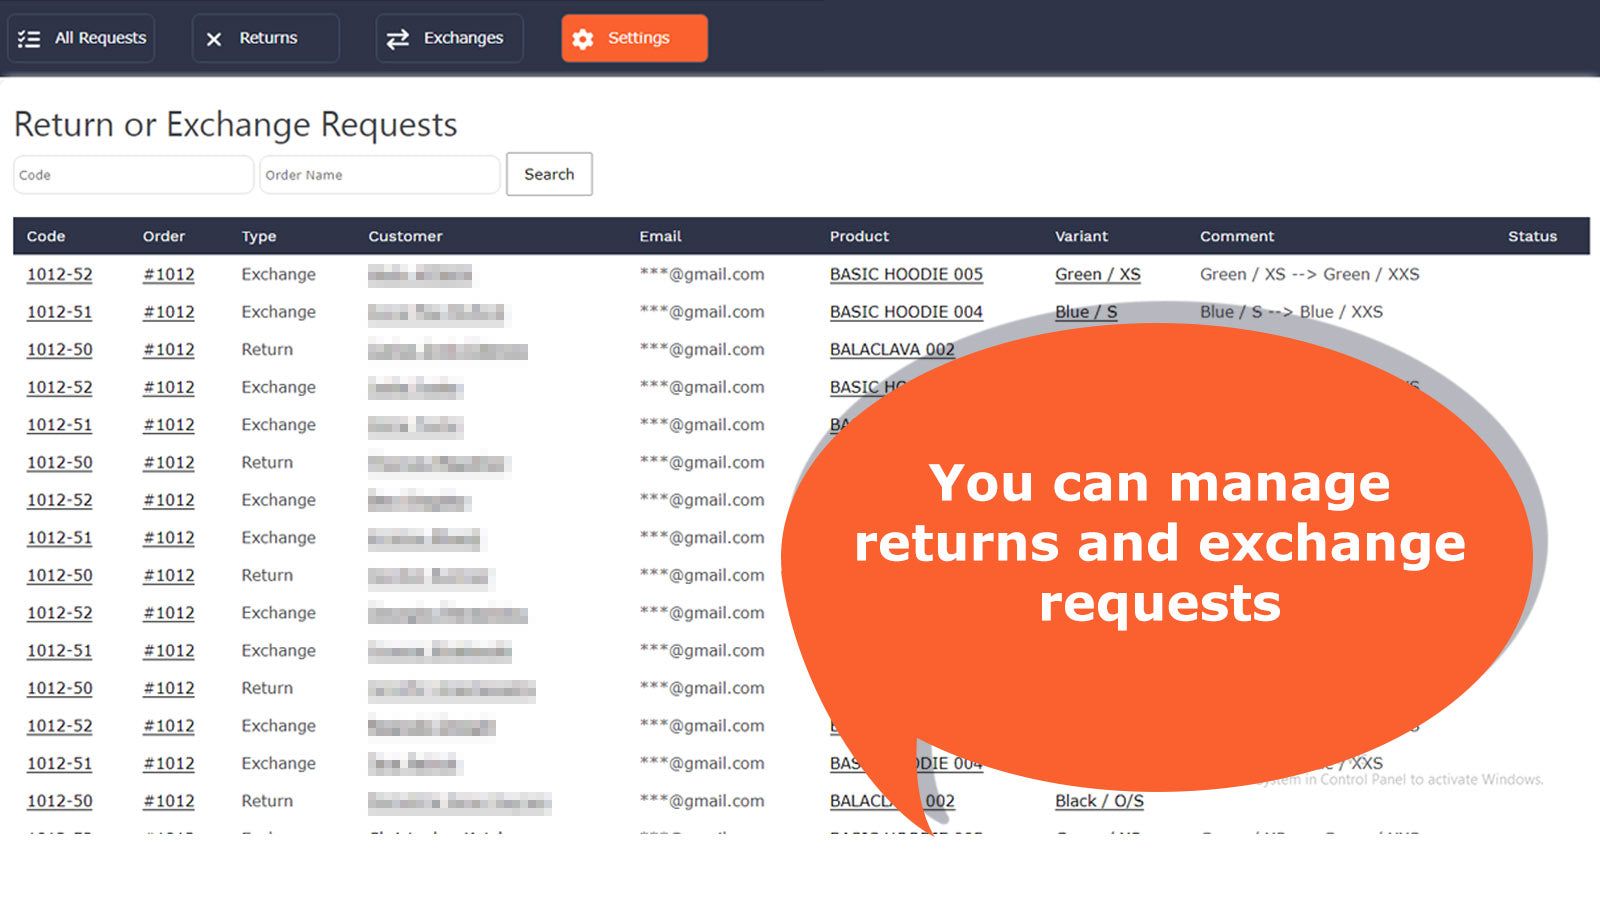 You can manage returns and exchange requests